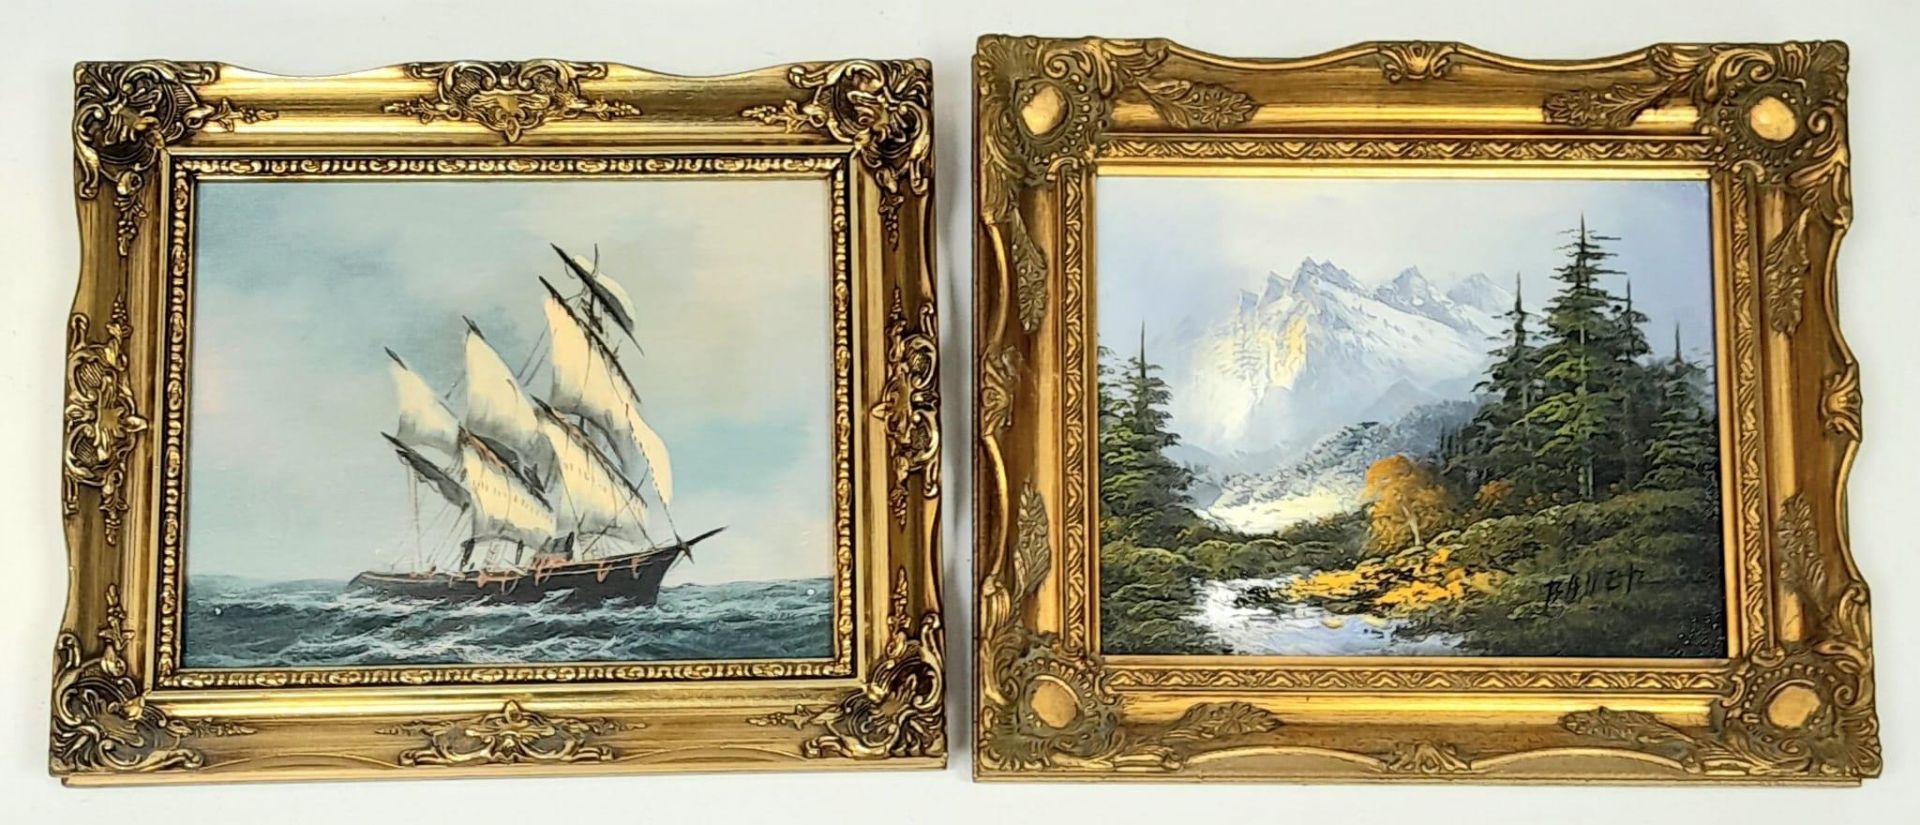 A pair of original paint on canvas artworks. One depicting a Snowy Mountain Range, with artist's